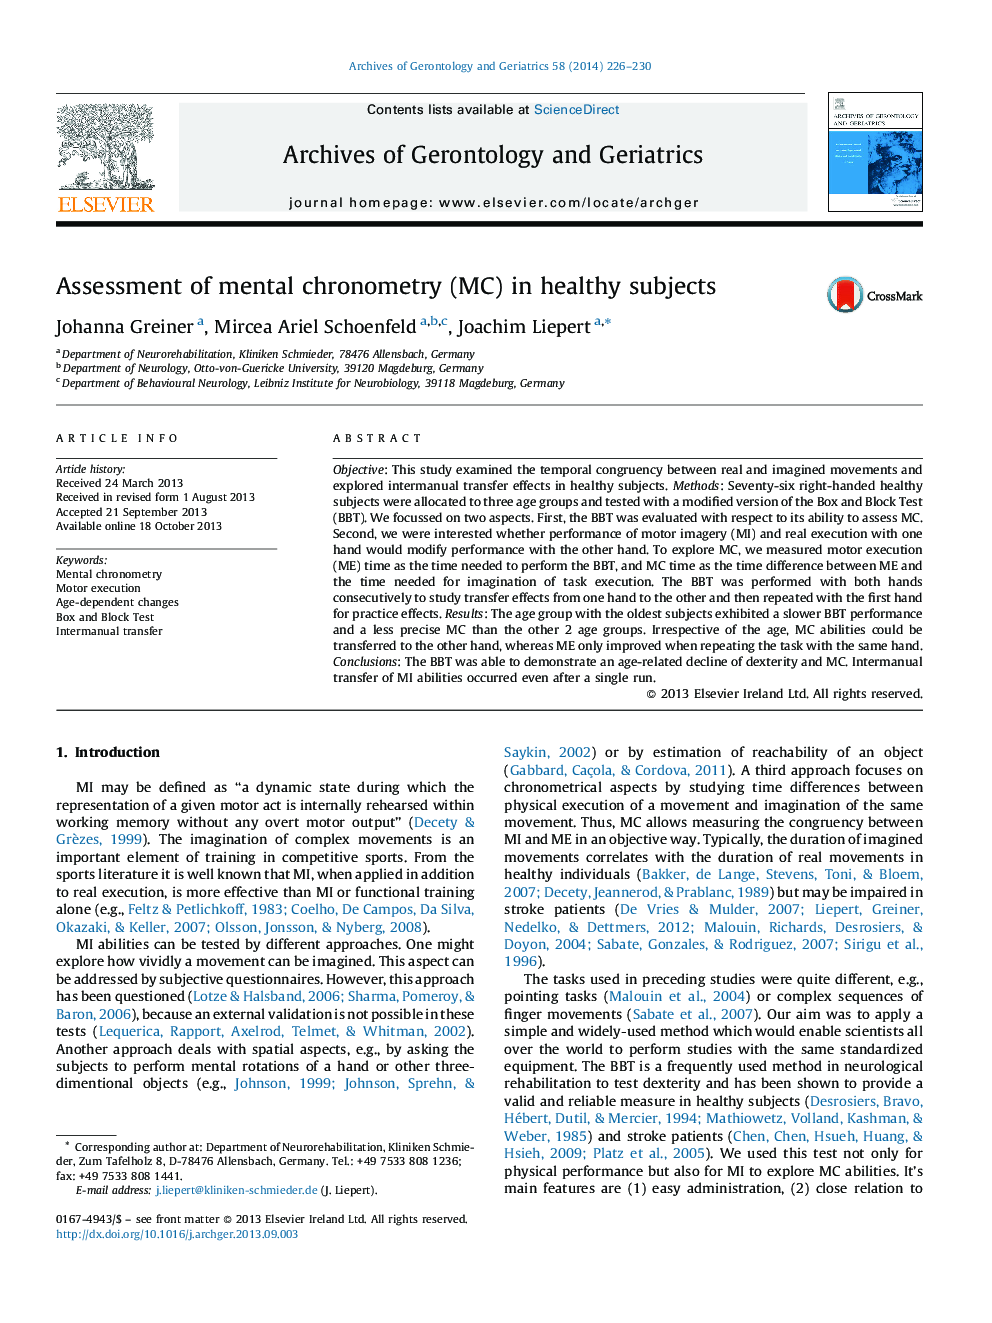 Assessment of mental chronometry (MC) in healthy subjects